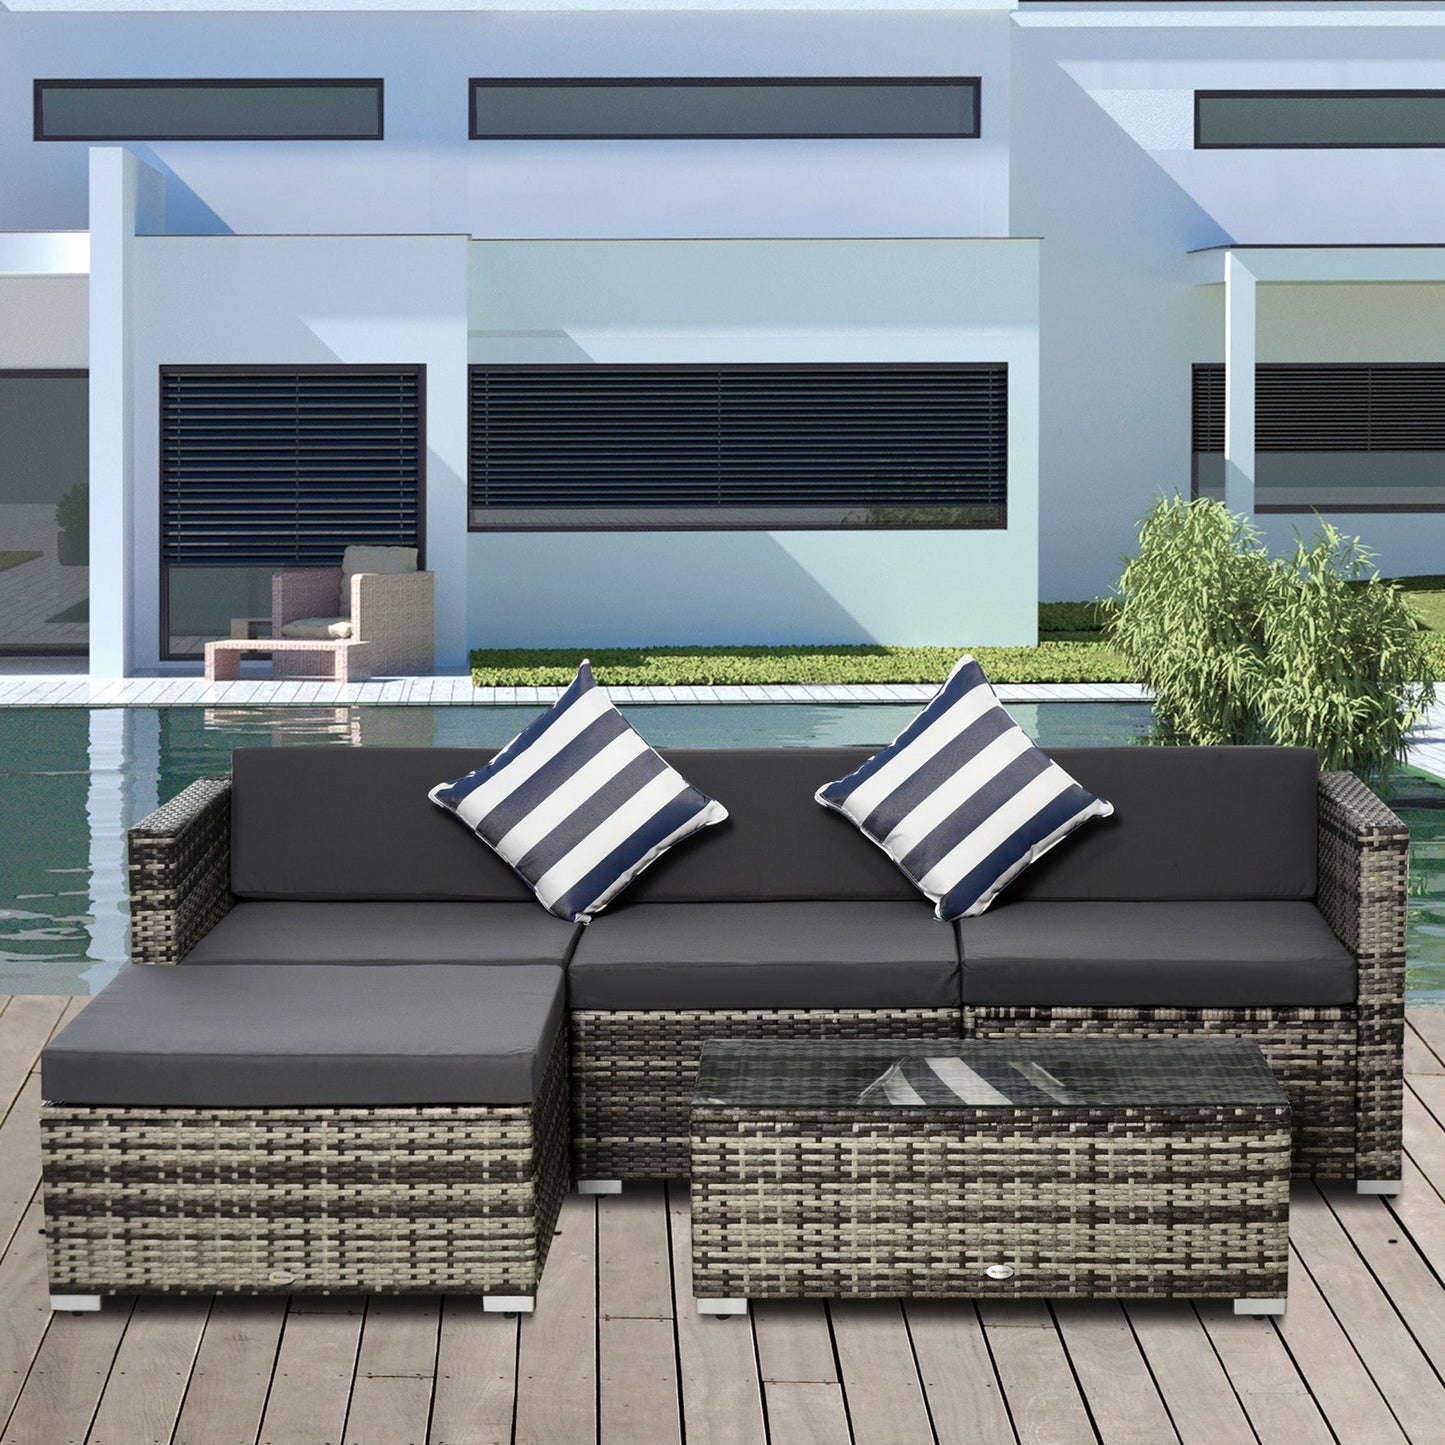 Outsunny 4-Seater Garden Rattan Furniture Set, Outdoor Sectional Conversation PE  Rattan Sofa Set, with Cushions Pillows and Glass Table, Mixed Grey